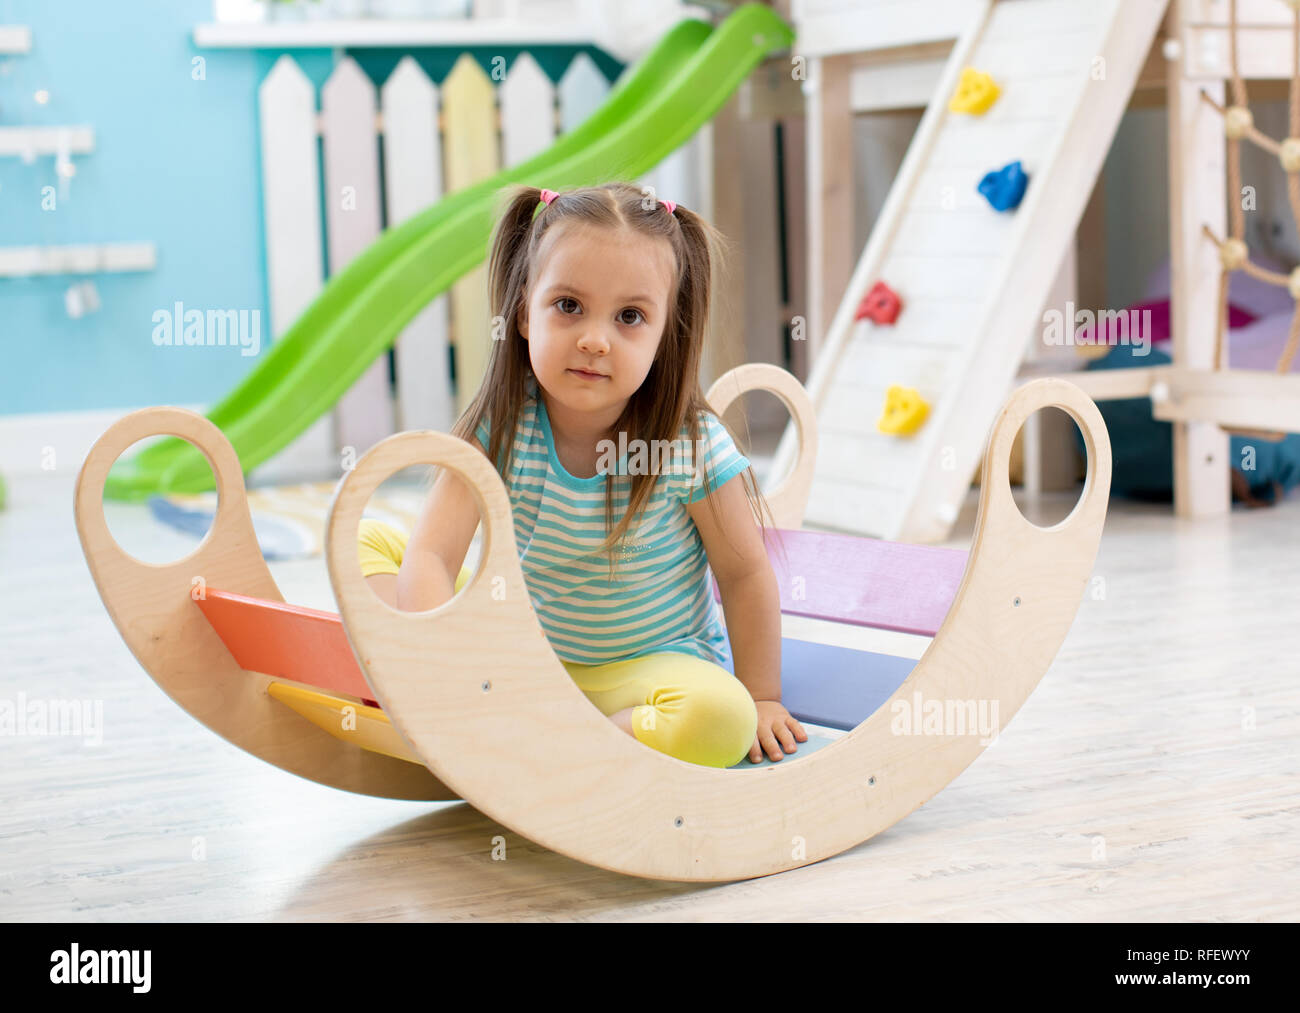 Cute child girl playing in nursery room Stock Photo